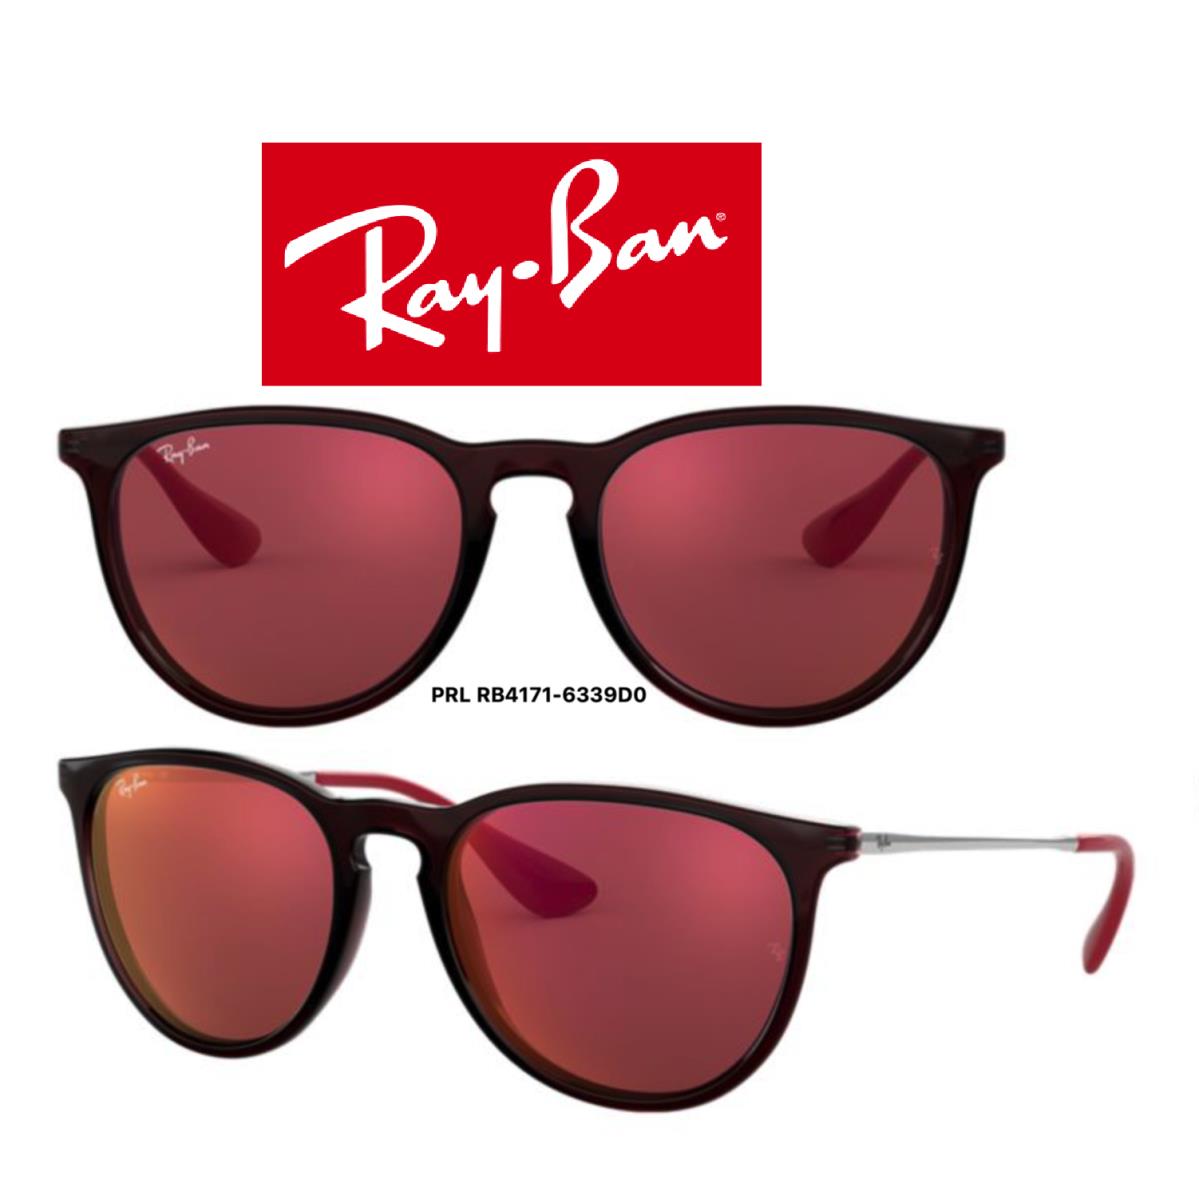 Ray-ban Ray Ban Sunglasses RB4171 Erika - Multiple Colors RB4171 6339D0